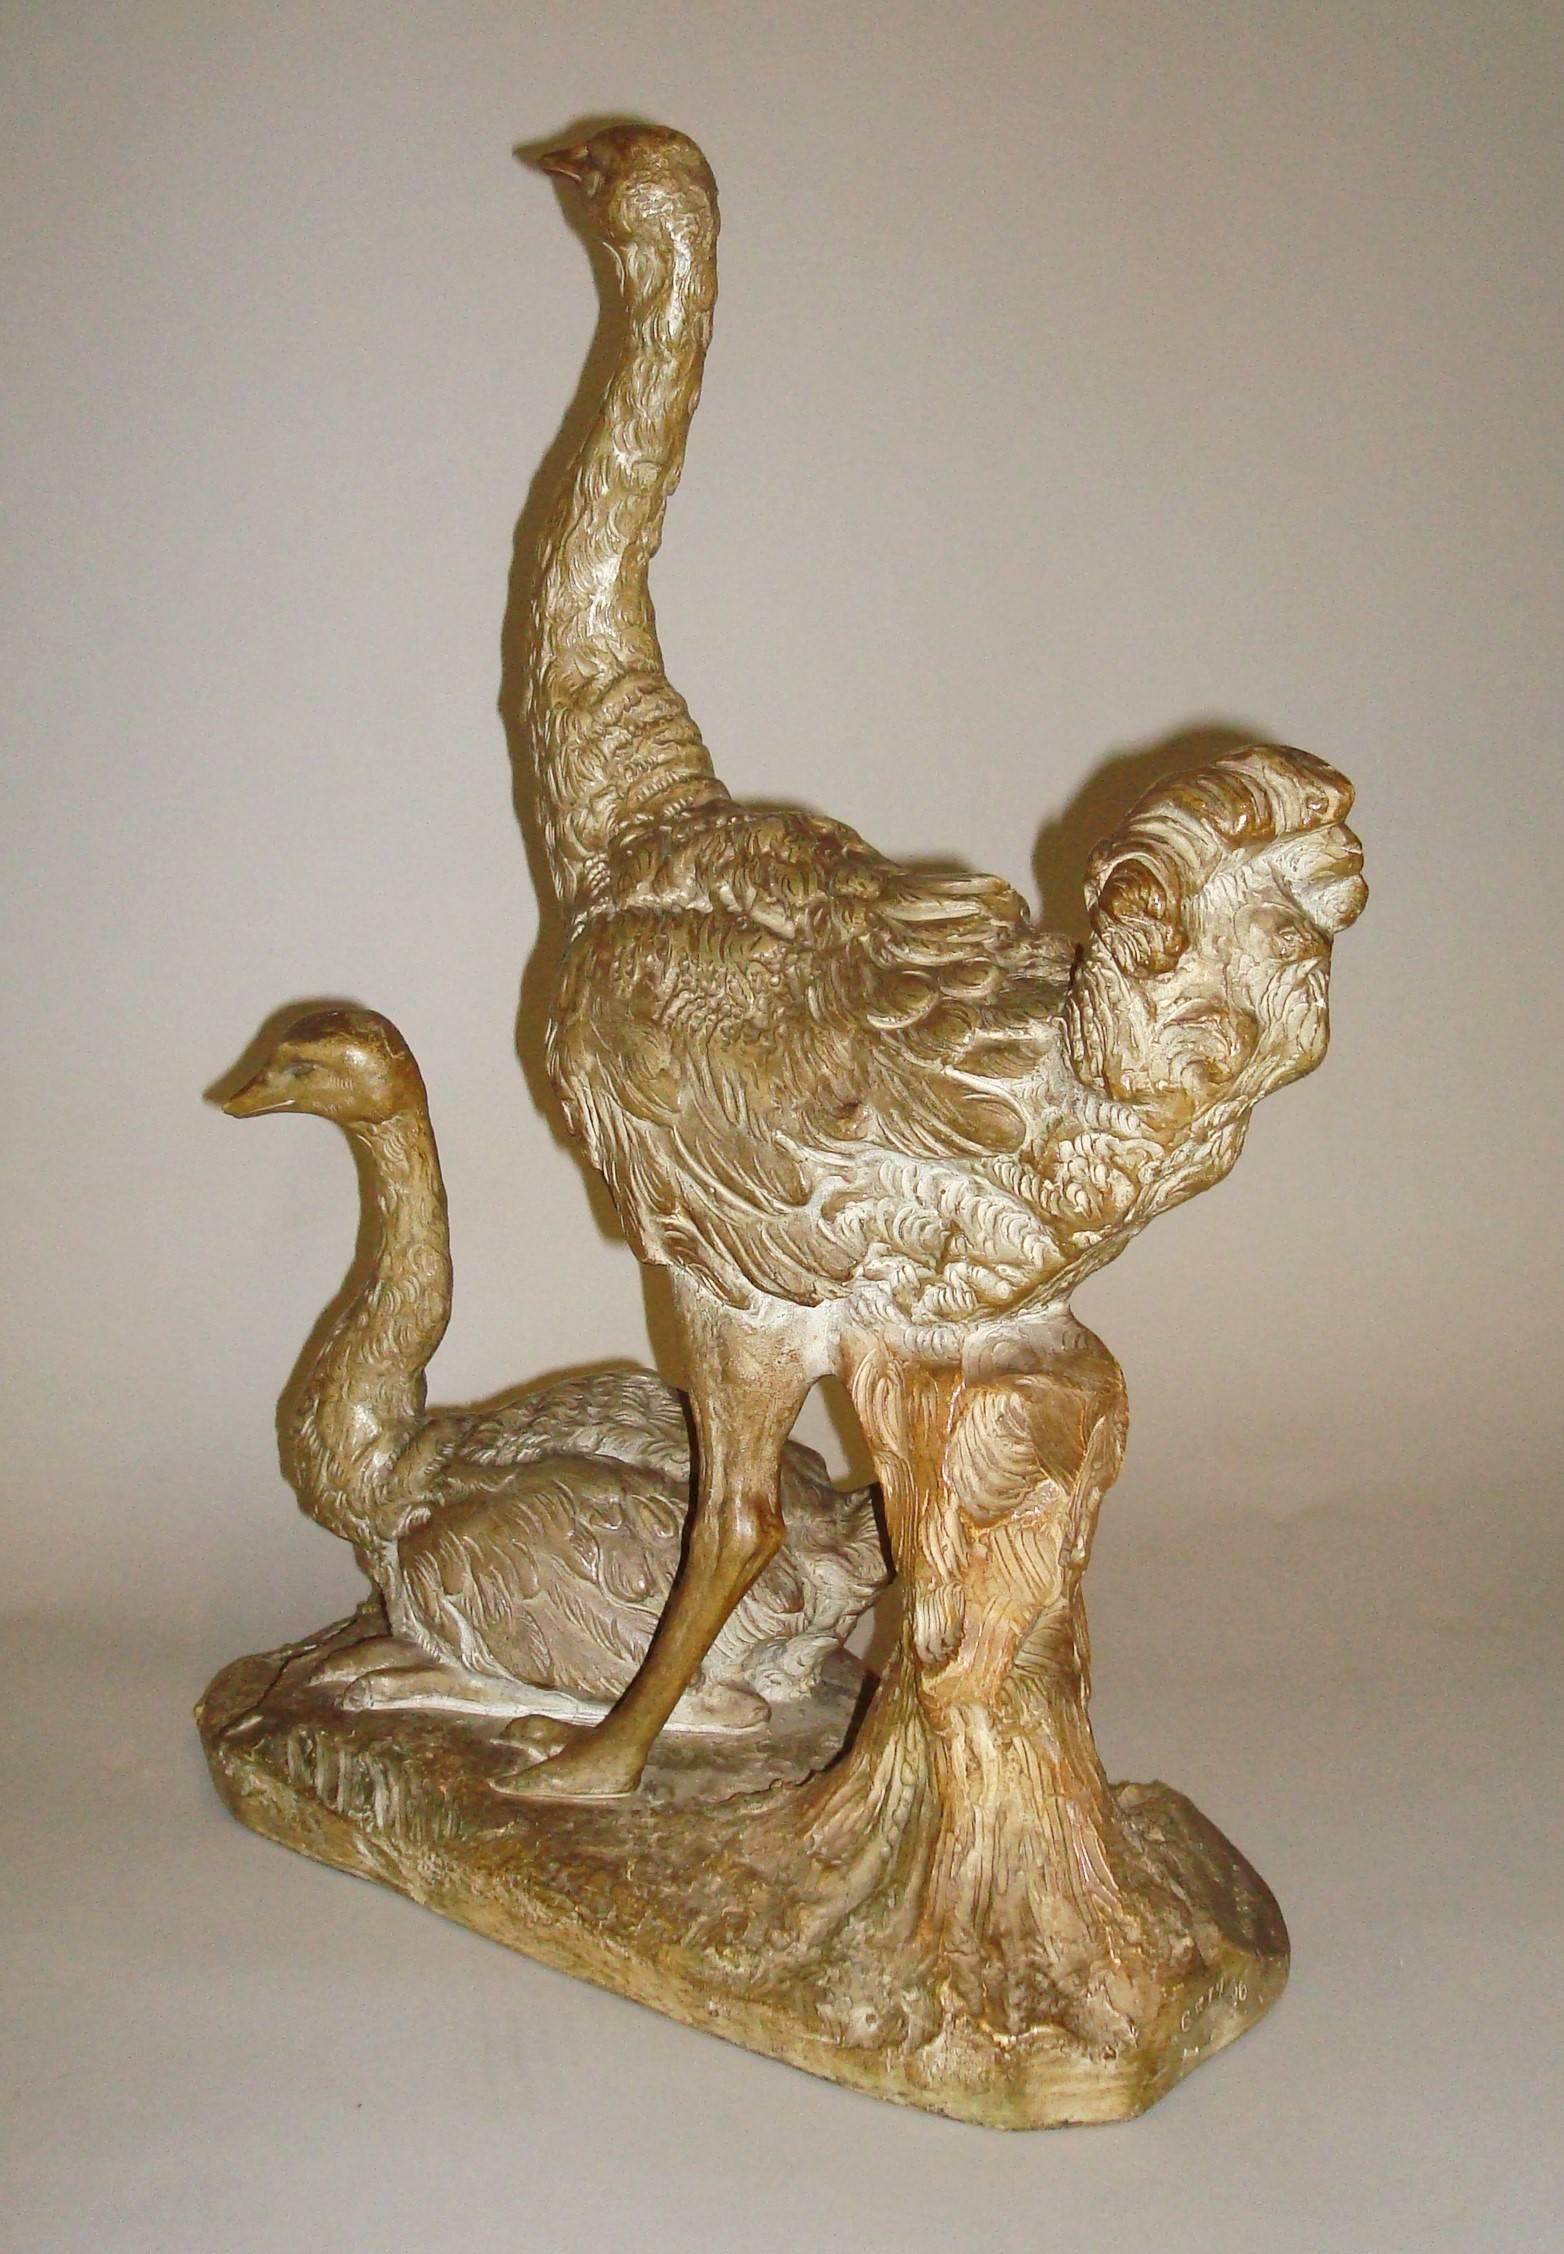 Early 20th Century Terracotta Sculpture of Ostriches In Excellent Condition For Sale In Moreton-in-Marsh, Gloucestershire